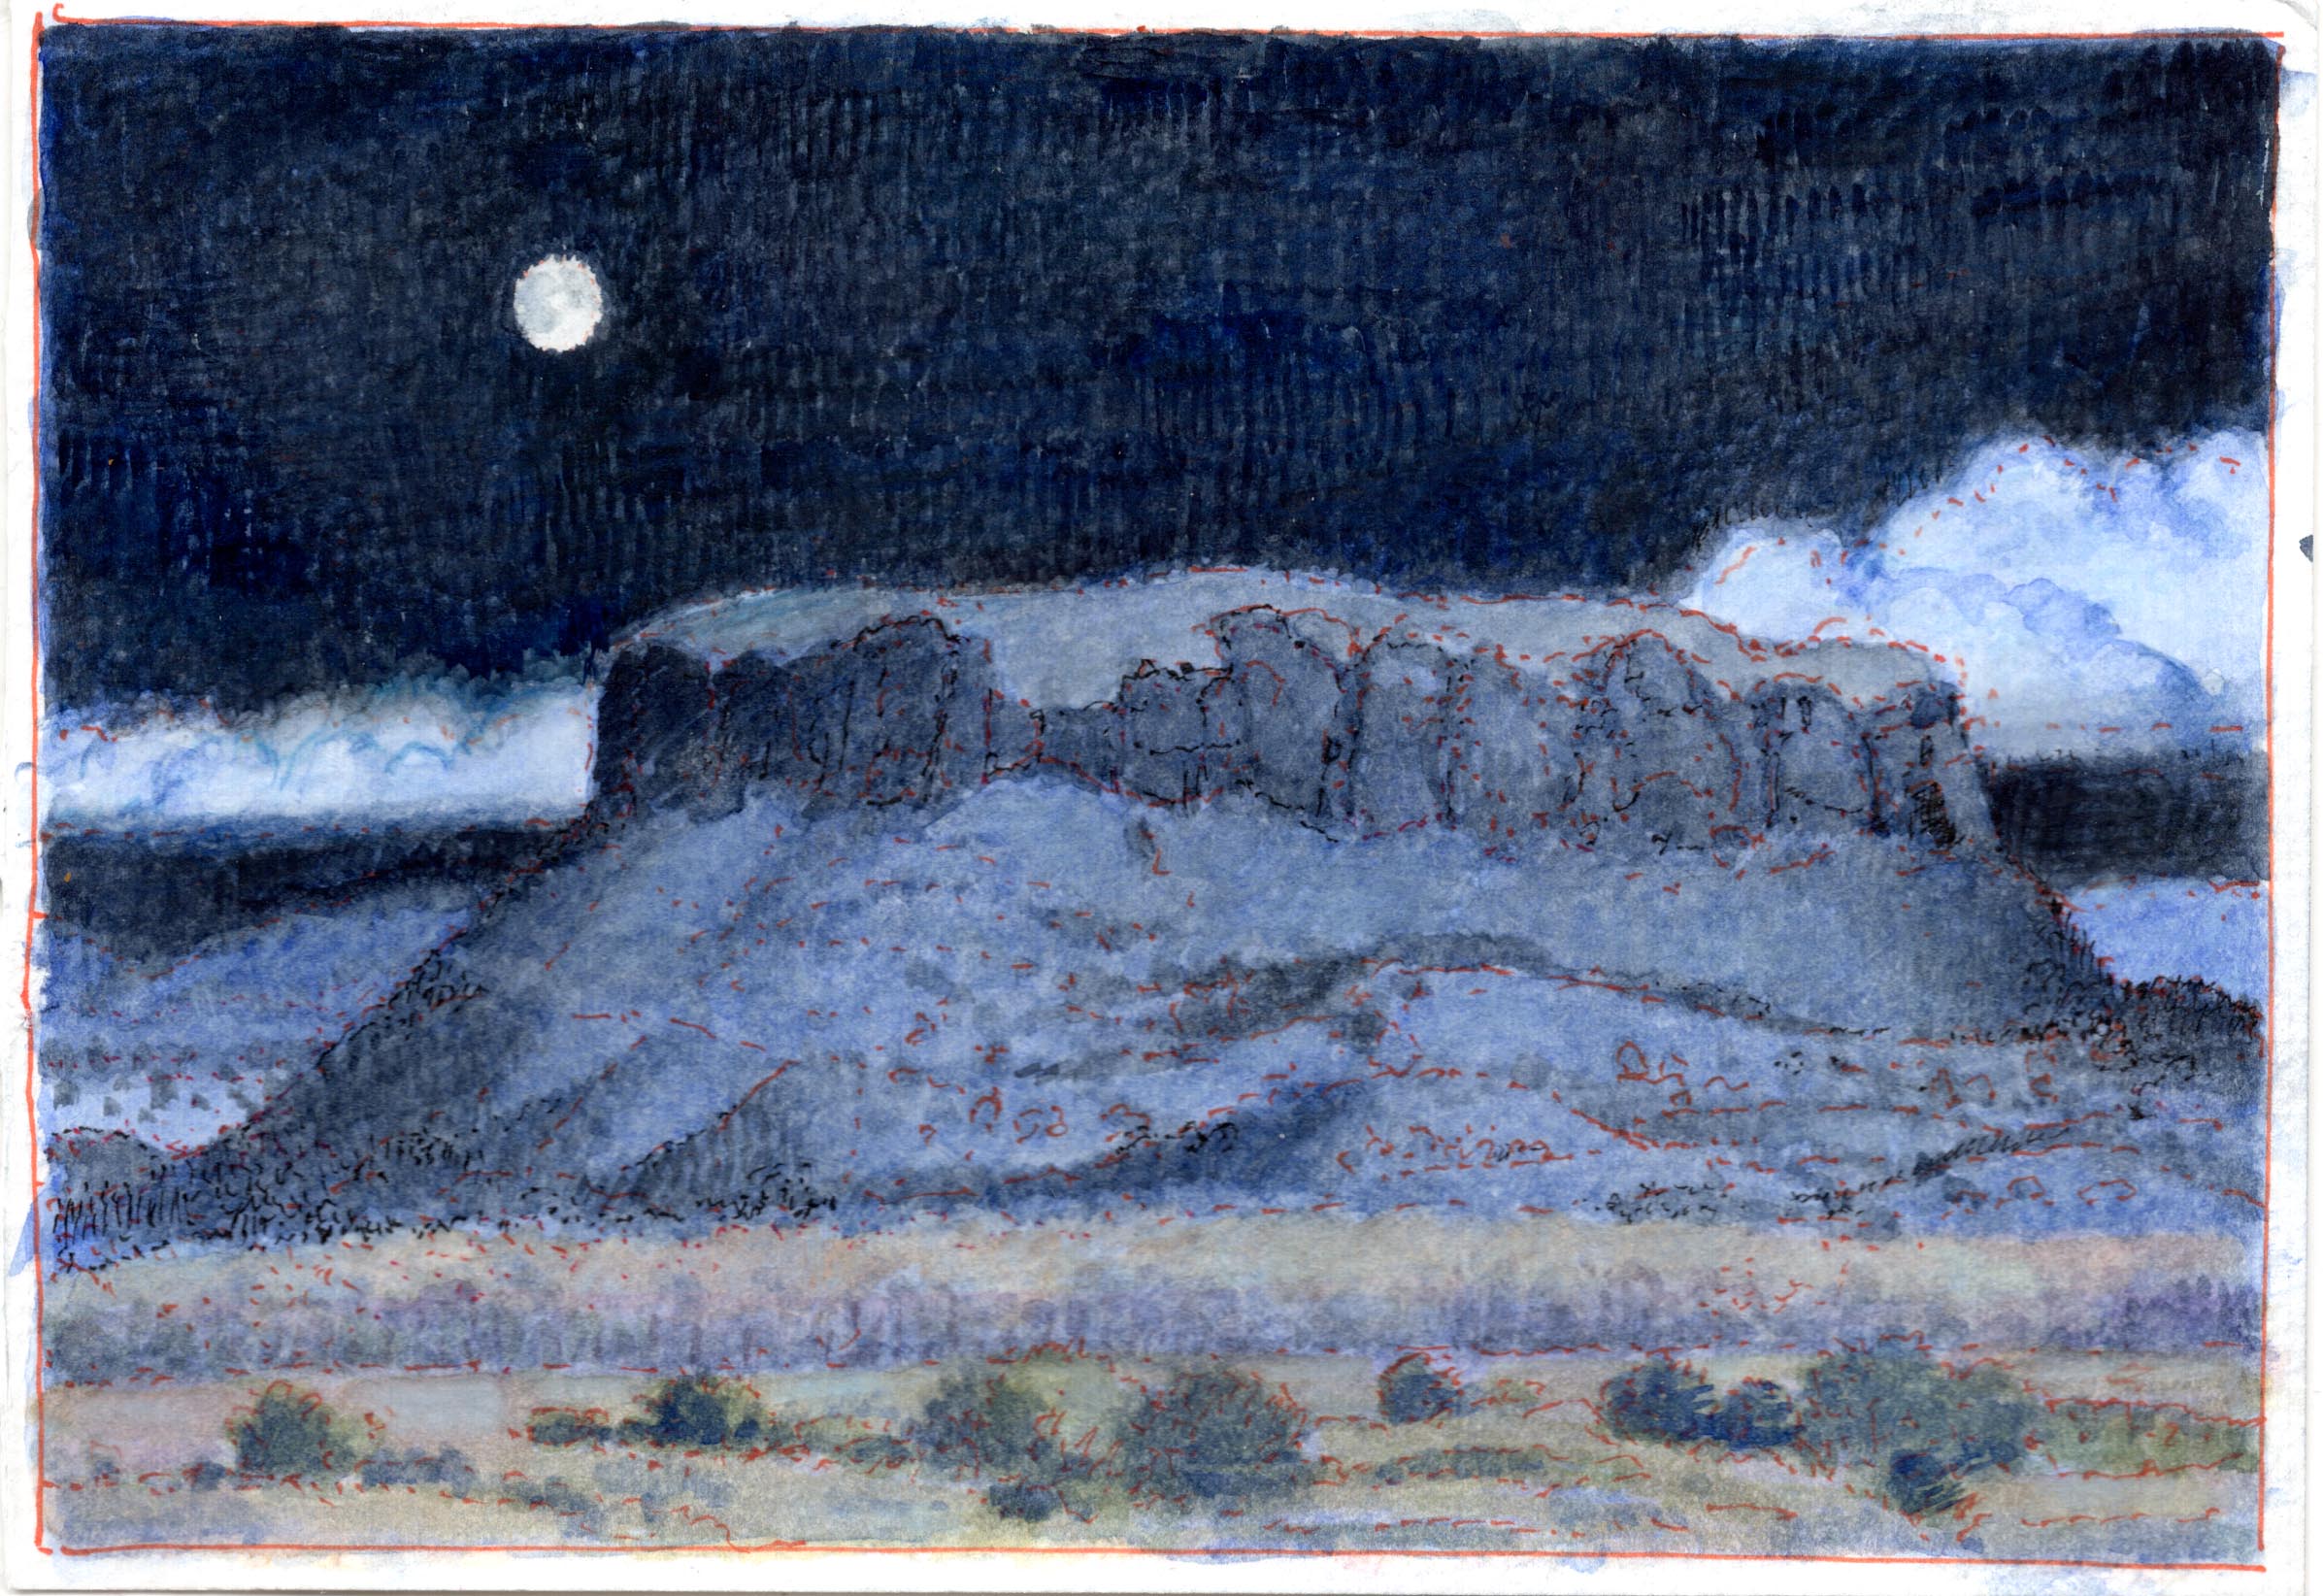 
							

									James McElhinney									Moonrise Mesa 									watercolor on paper<br />
5 1/4 x 7 3/4 inches									


							